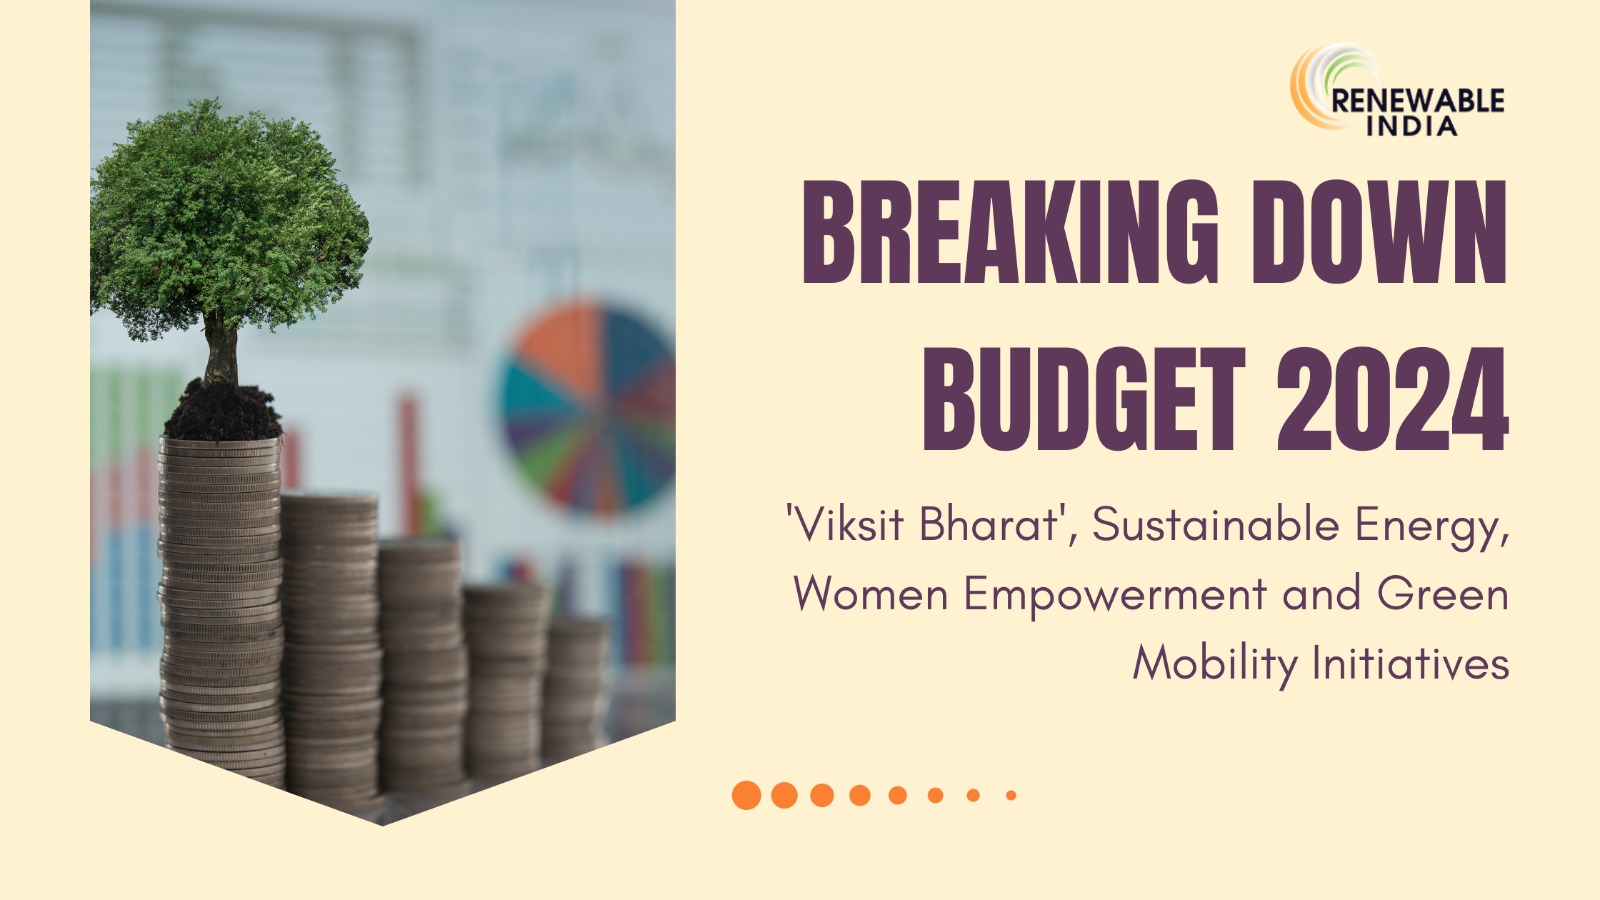 Budget 2024 for ‘Viksit Bharat’, Sustainable Energy, Women Empowerment and Green Mobility Initiatives